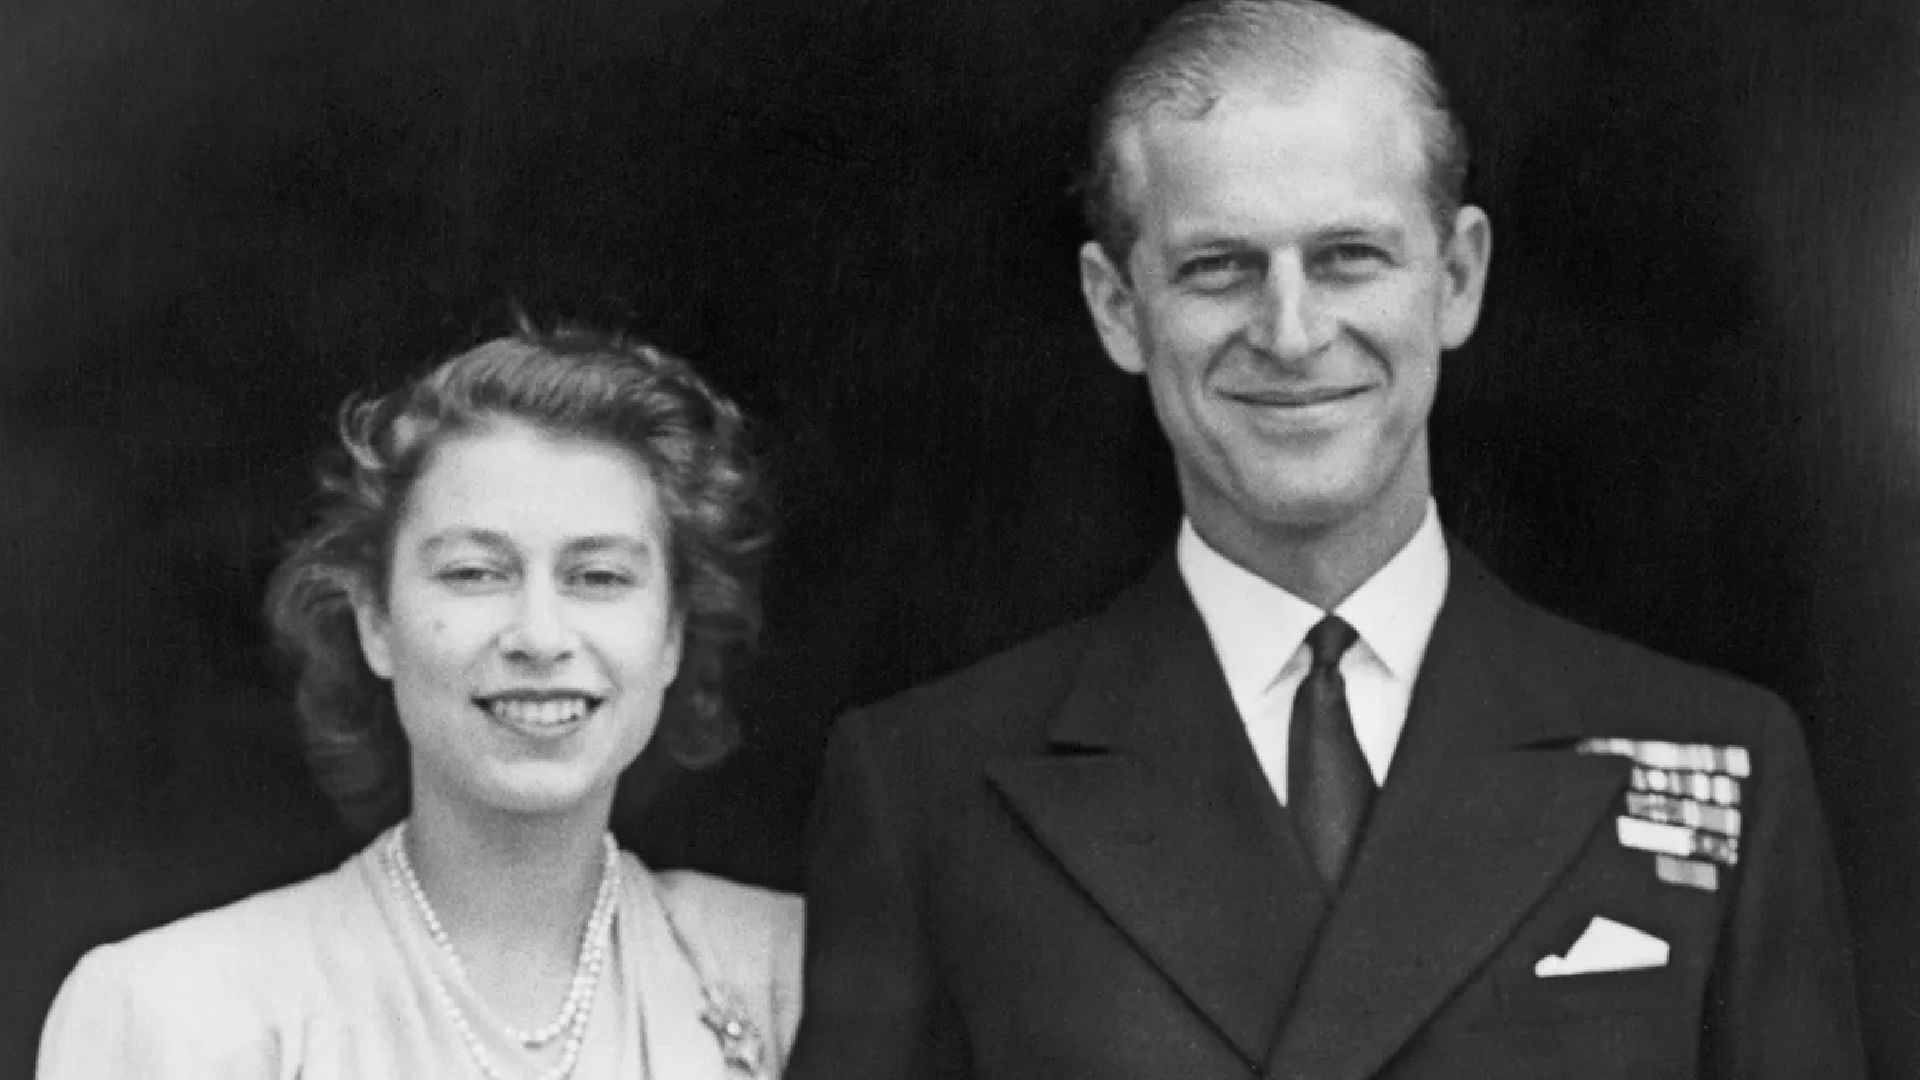 <p>                     The engagement of Princess Elizabeth and Lieutenant Philip Mountbatten was officially announced on July 9, 1947, and they started their love story in a thoroughly modern way, sharing their happy news via global media broadcasts of pictures and videos. Prince Philip also designed her engagement ring himself, perhaps making this jewellery piece one of the most unique in Queen Elizabeth’s stunning collection.                   </p>